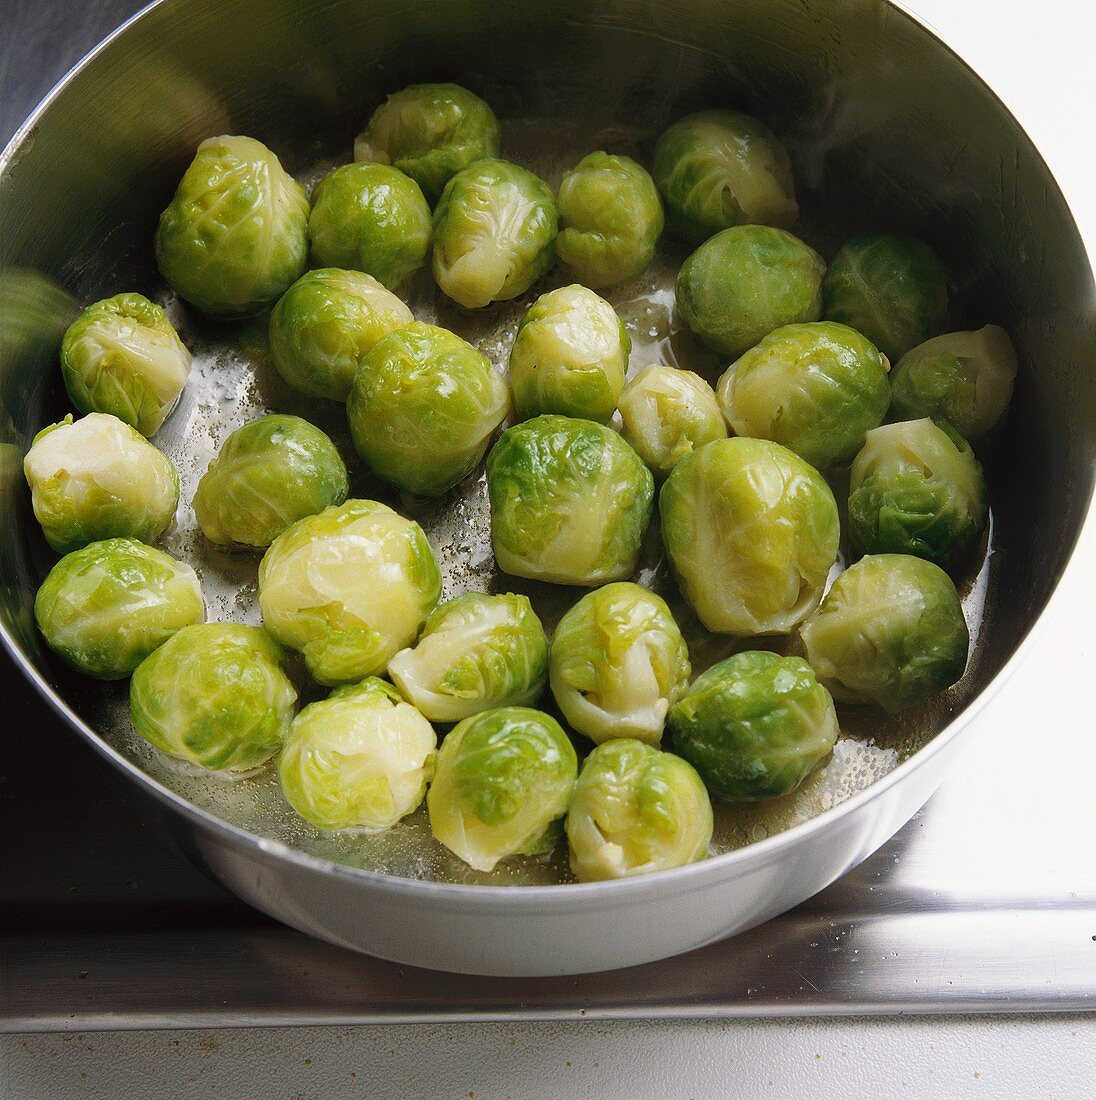 Tossing Brussels sprouts in butter